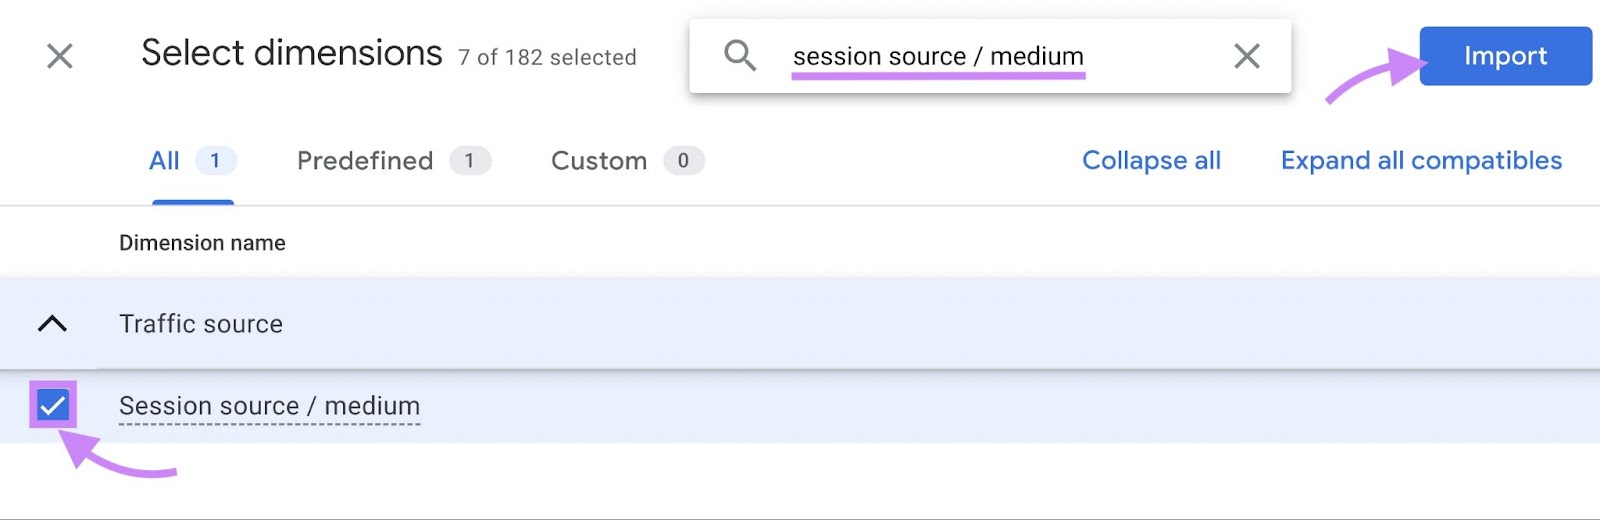 “session source / medium” dimension selected